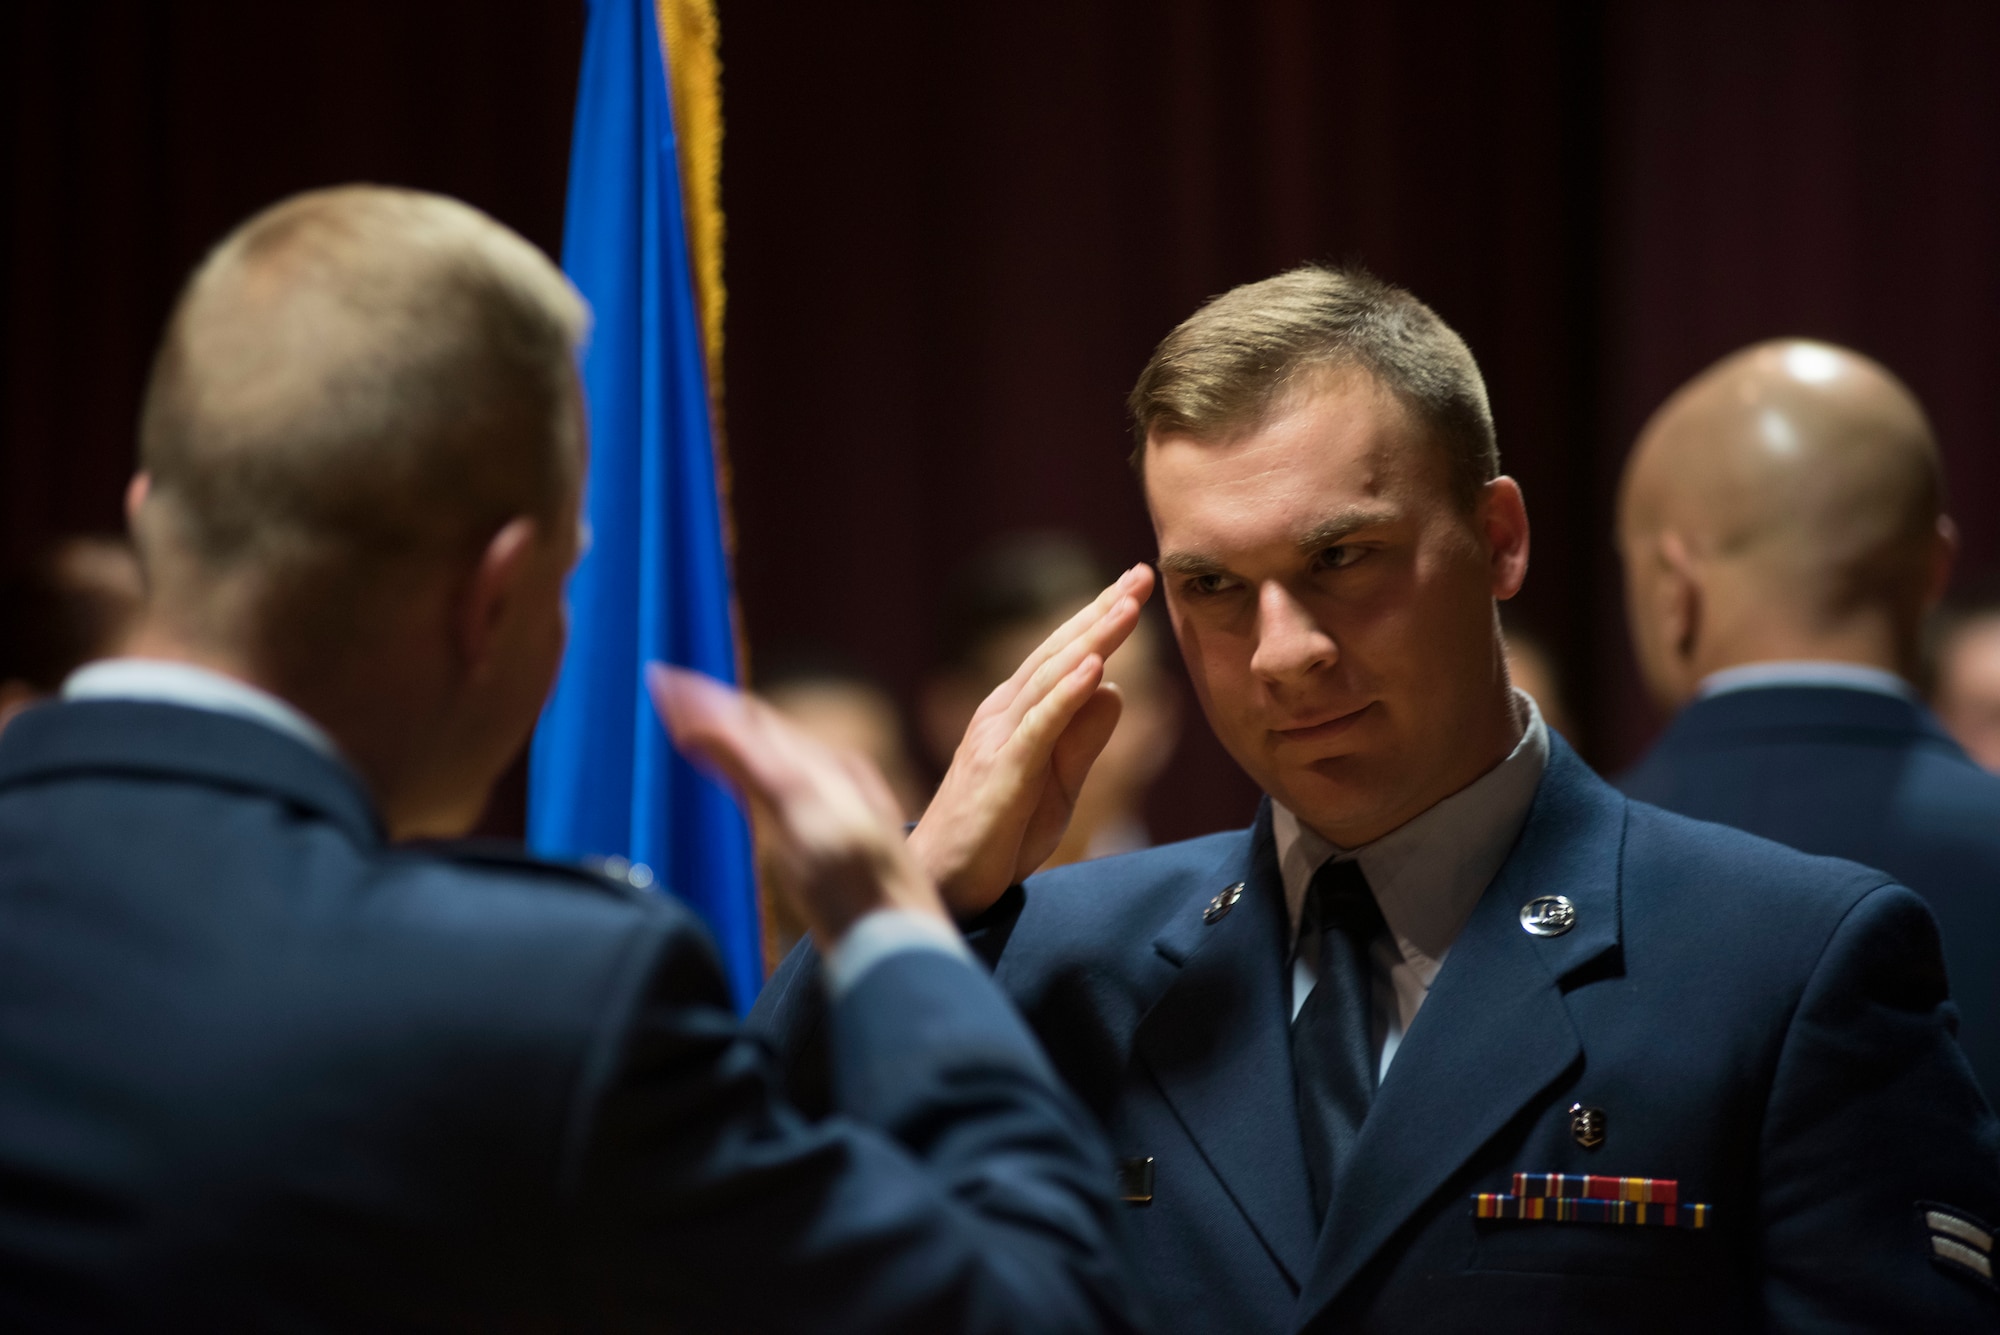 A Base Honor Guard graduate salutes Col. Derek Salmi, 92nd Air Refueling Wing commander, during a graduation ceremony at Fairchild Air Force Base, Washington, Aug. 10, 2018. Graduates will go on to serve for four months, performing dozens of ceremonies on base and across Washington State. (U.S. Air Force photo/Senior Airman Ryan Lackey)